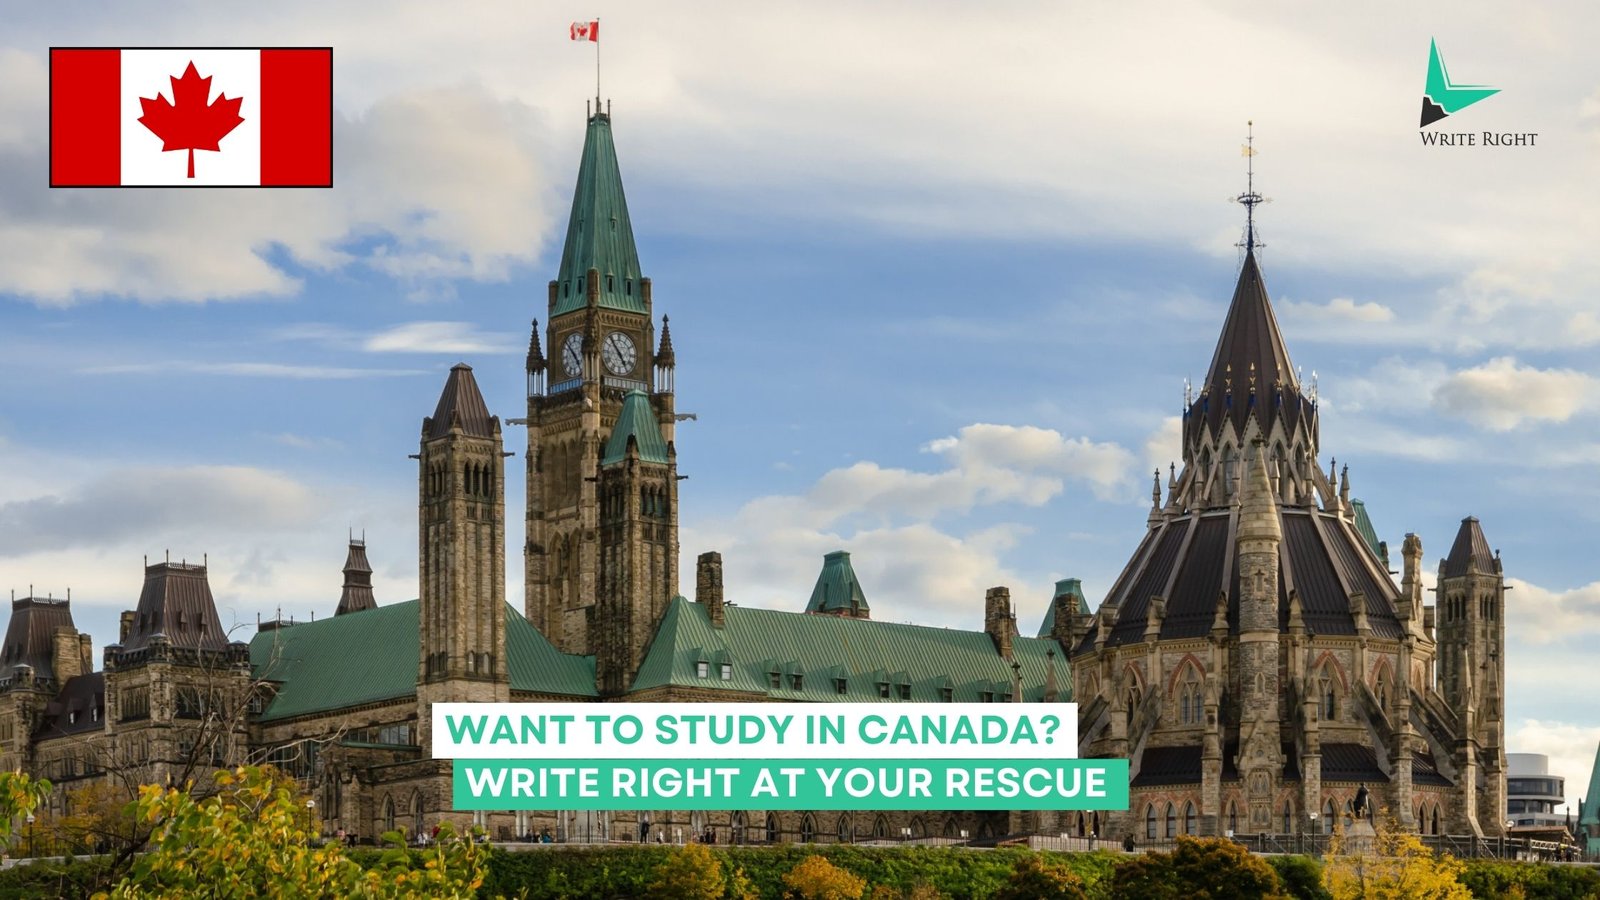 Are you a student wanting to study in Canada? Write Right will help you secure your admission to Canadian universities